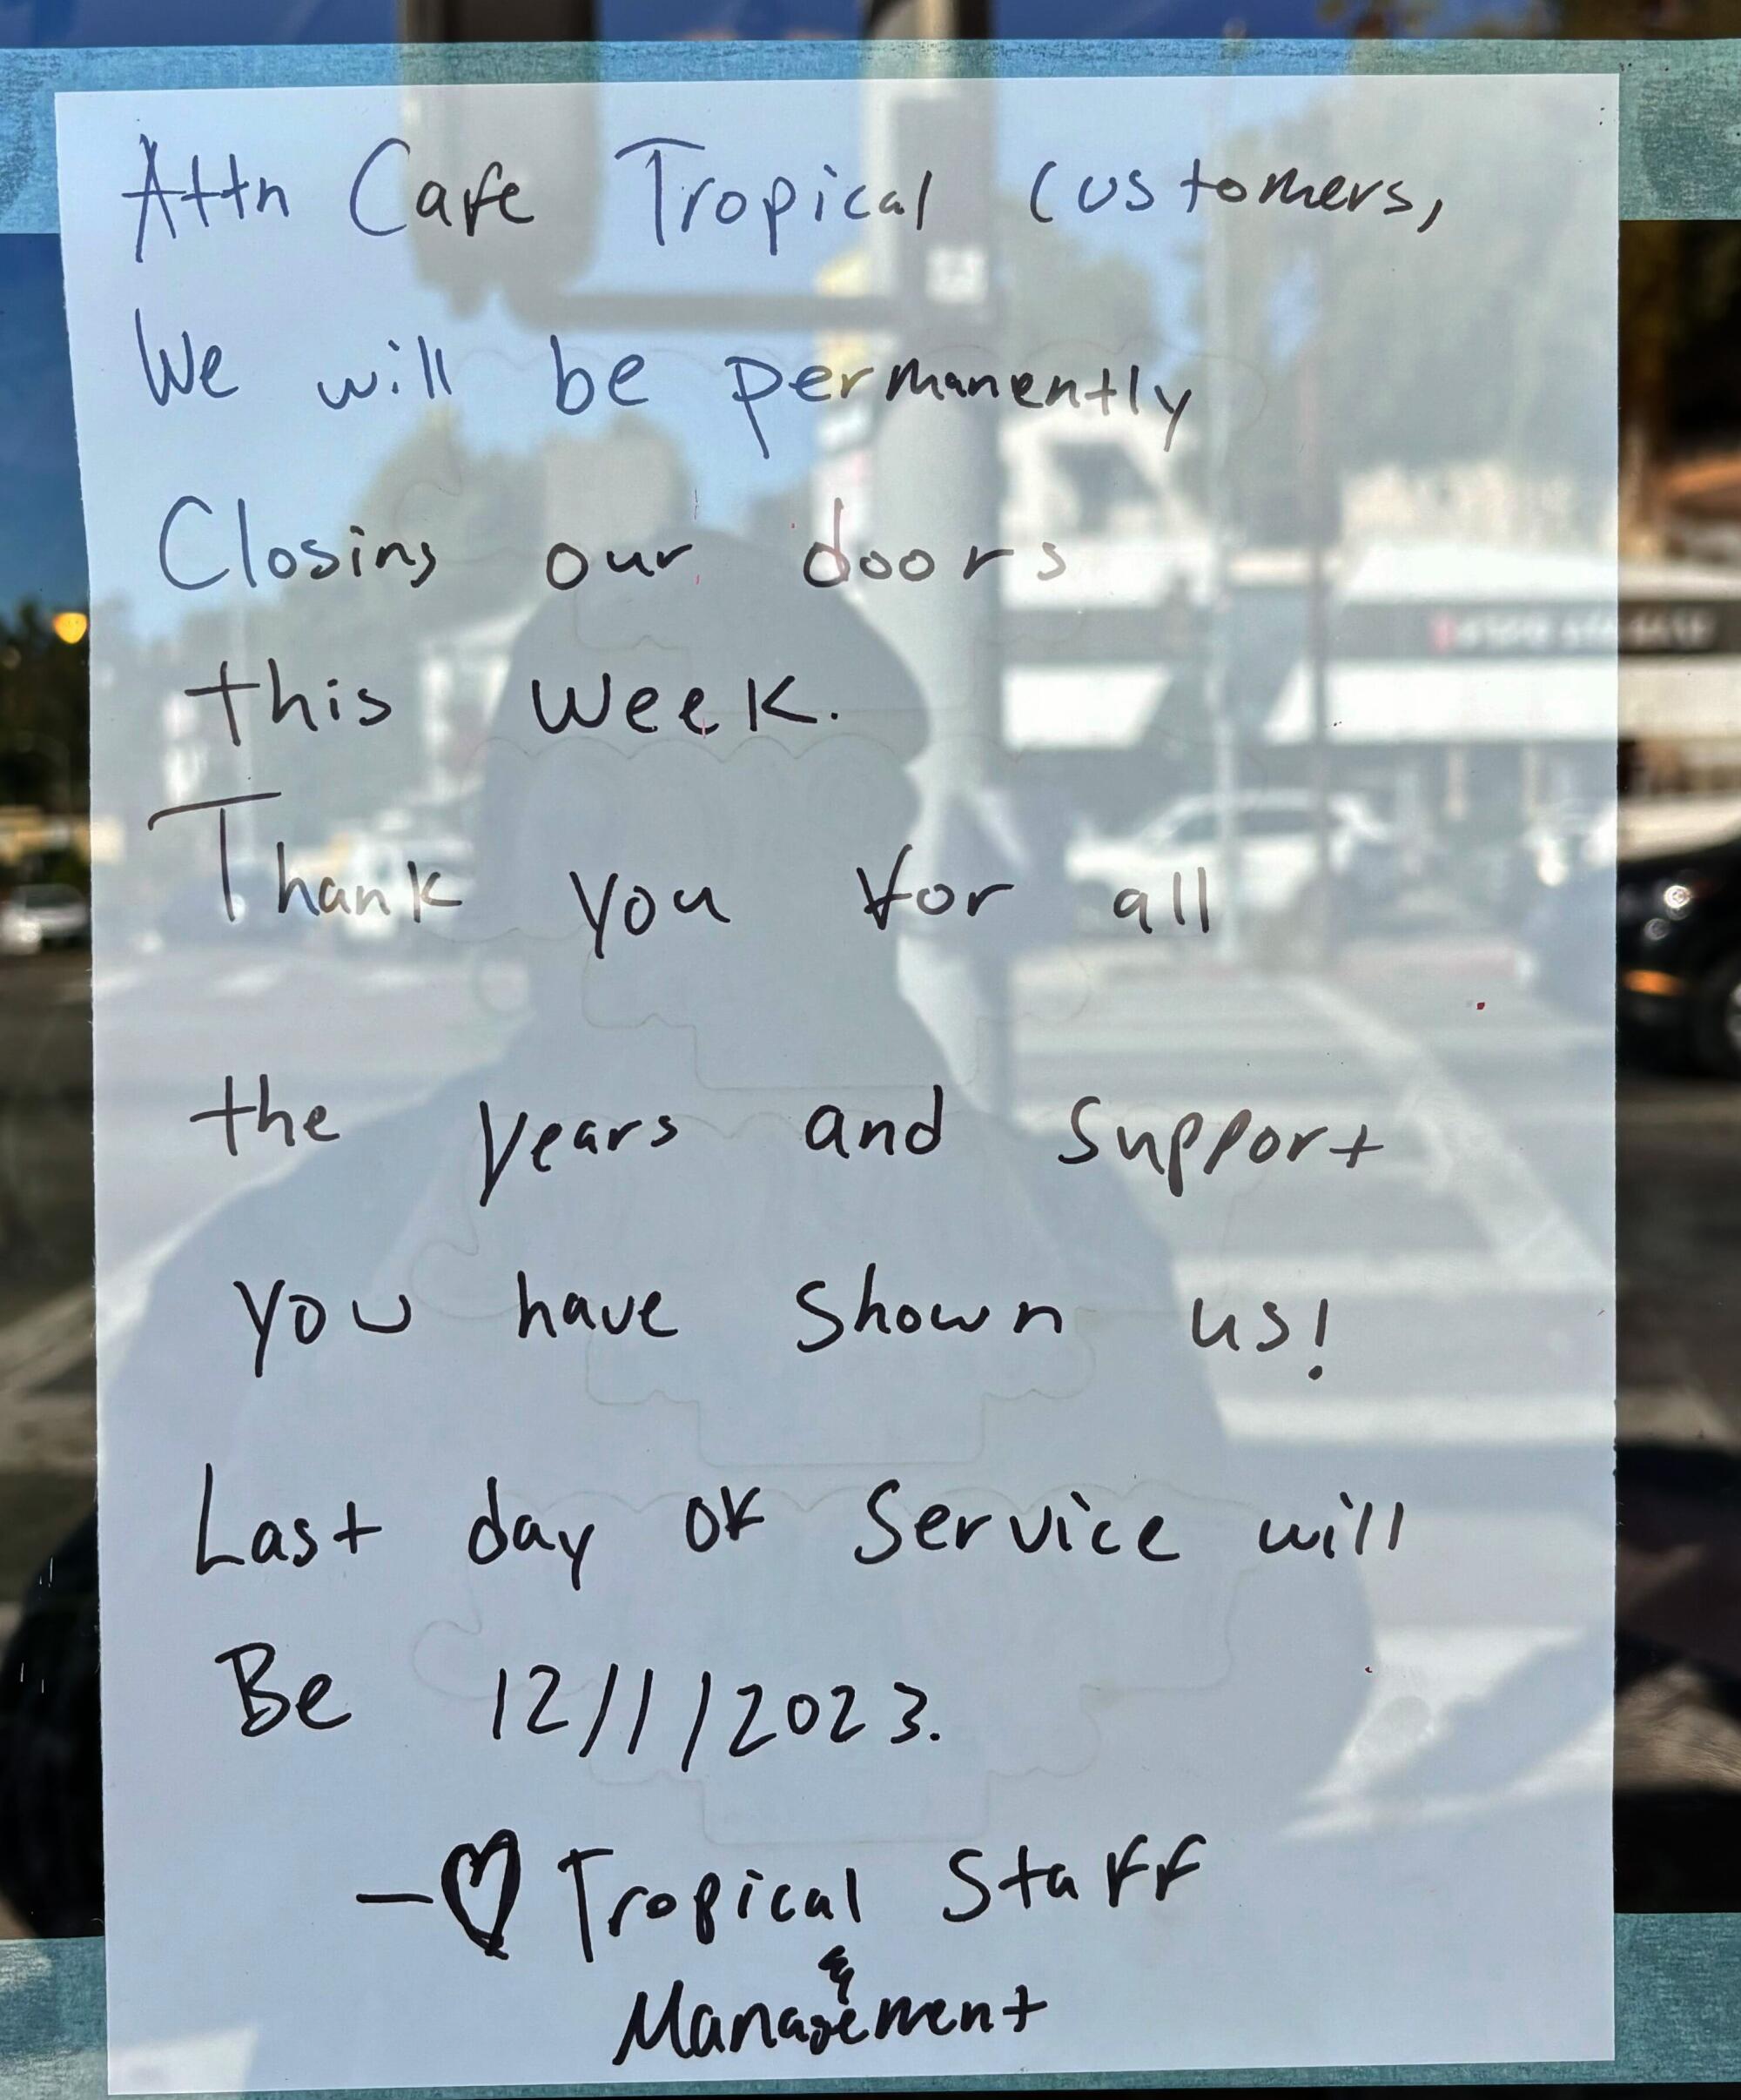 A hand-written sign at Cafe Tropical 